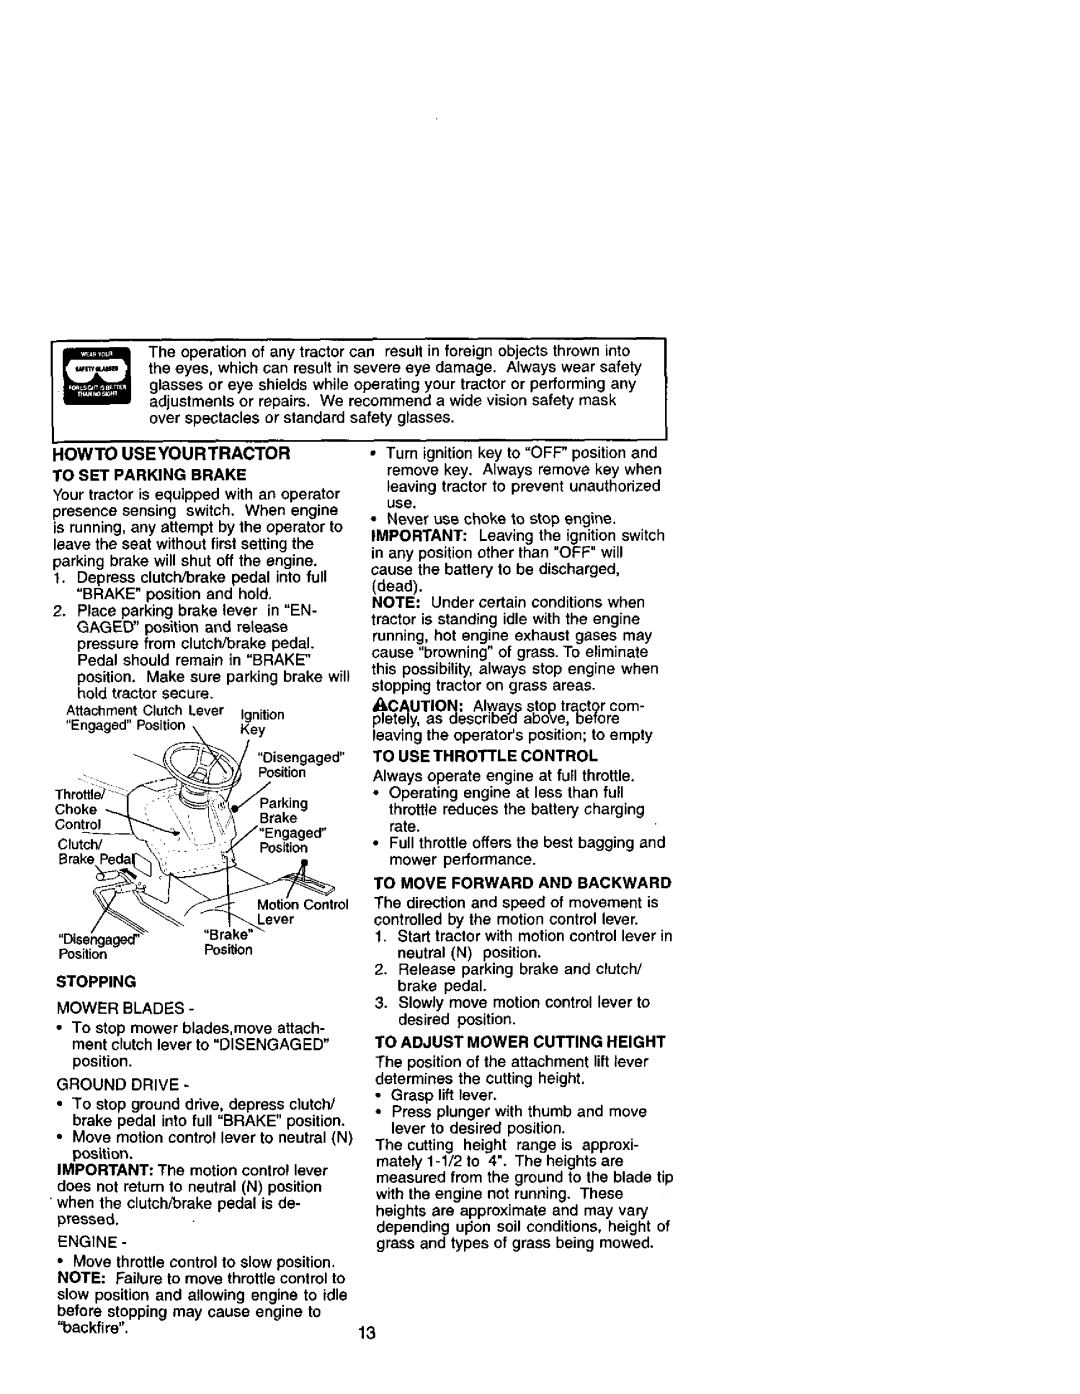 Craftsman 917.271641 owner manual Howto Useyourtractor To Set Parking Brake, Con ol 